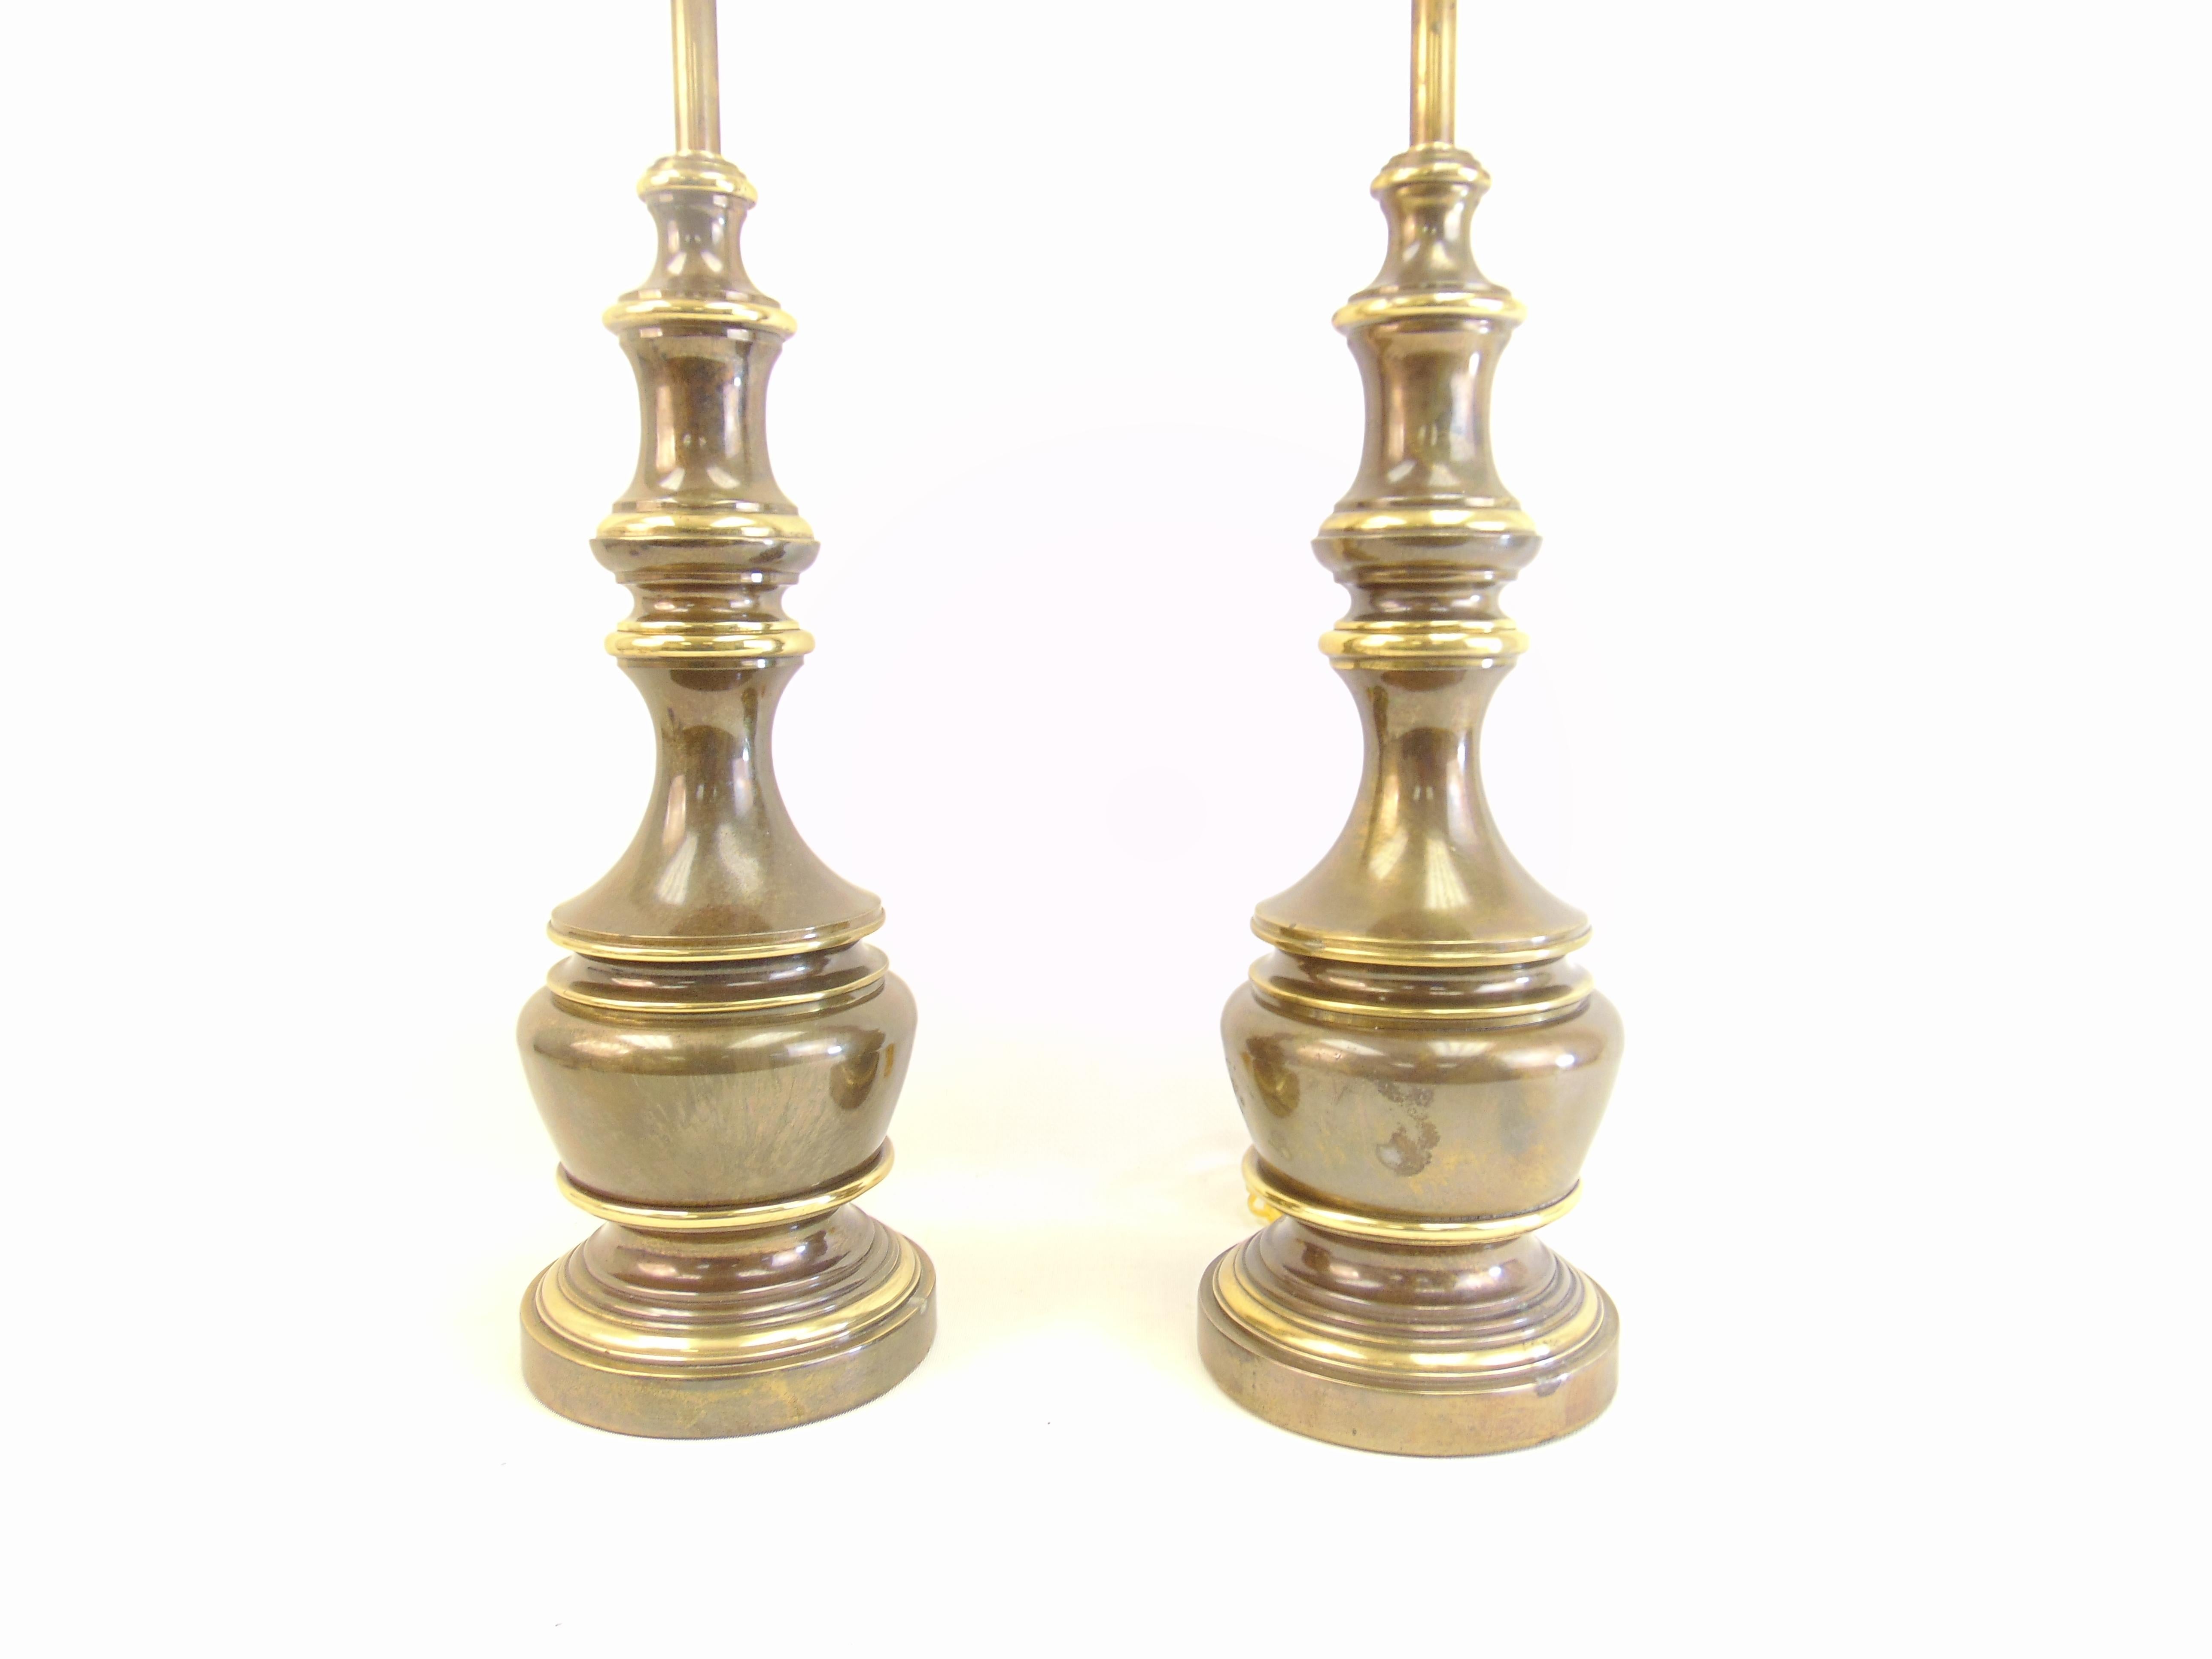 Pair of Midcentury Brass Table Lamps In Good Condition For Sale In Tulsa, OK